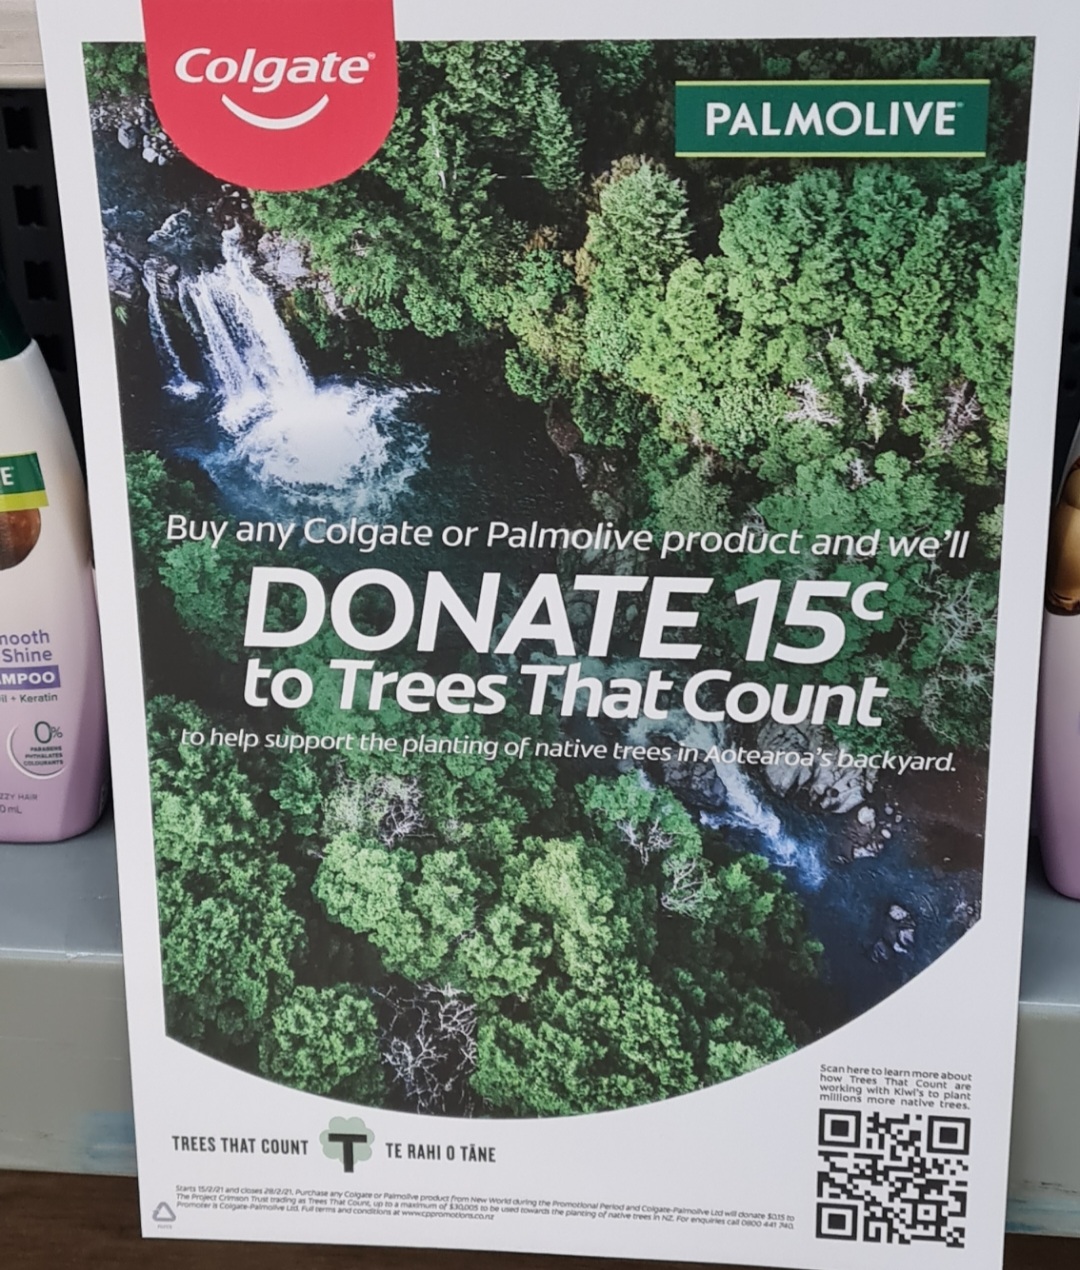 Colgate-Palmolive greenwashing in the supermarket to assuage consumer guilt but not actually preventing palm oil deforestation associated with their brand